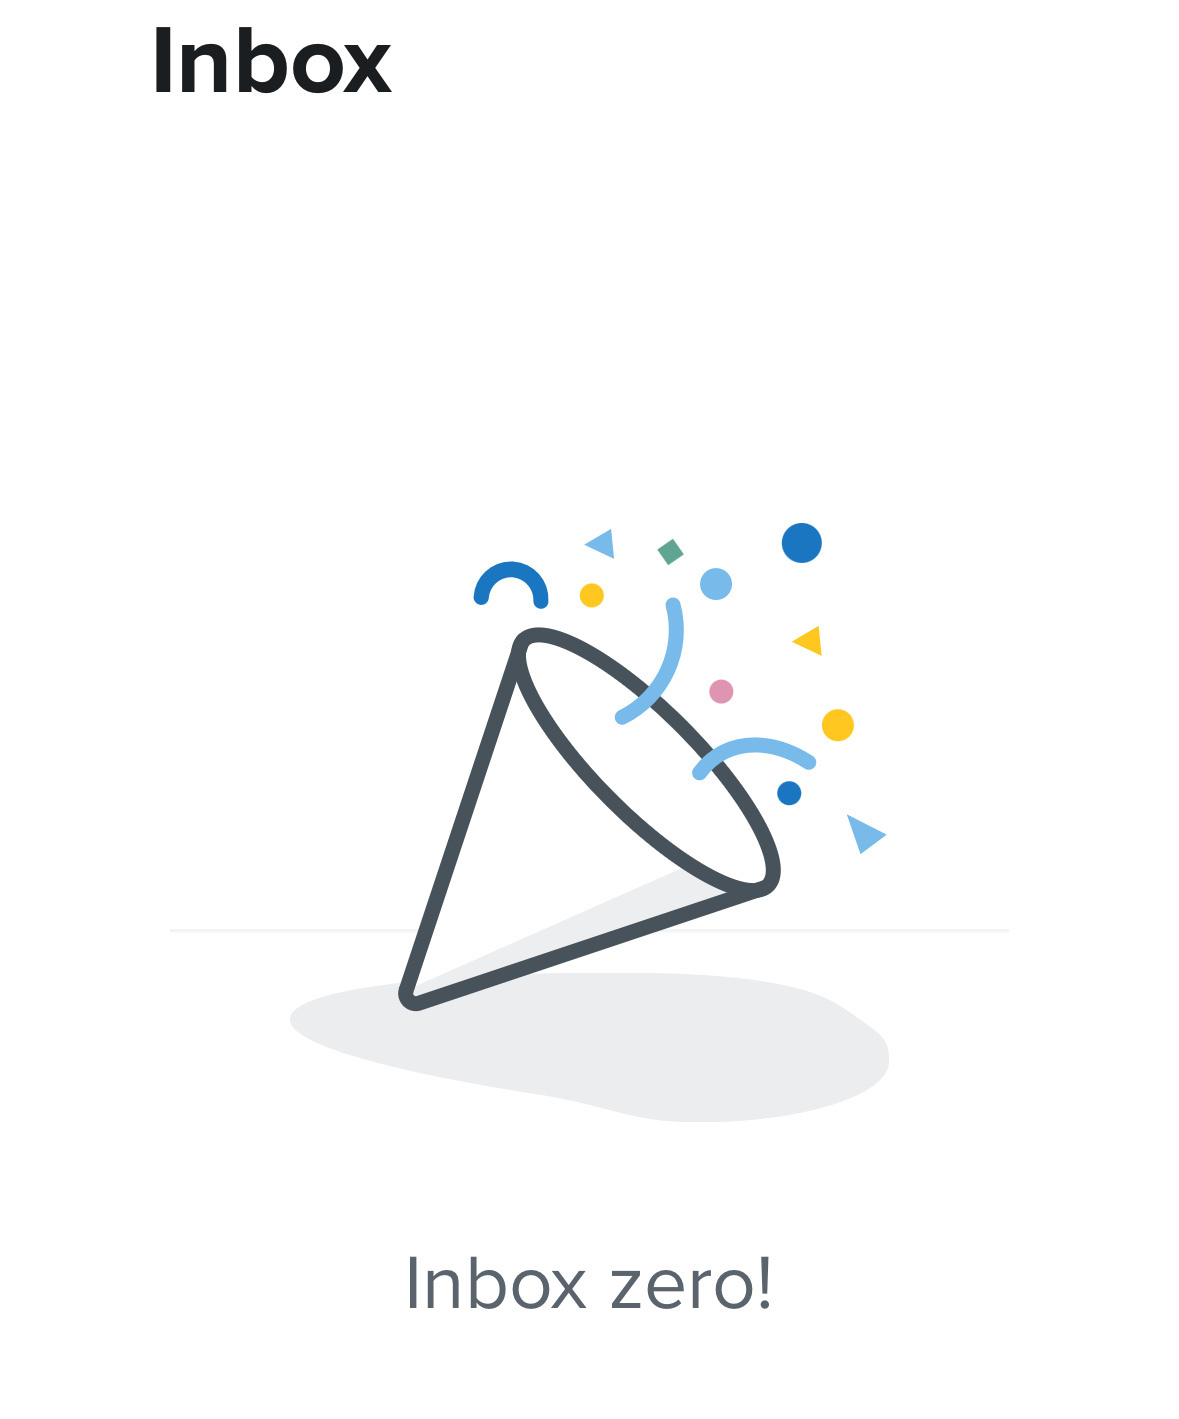 An inbox zero logo within an email app. A party logo.